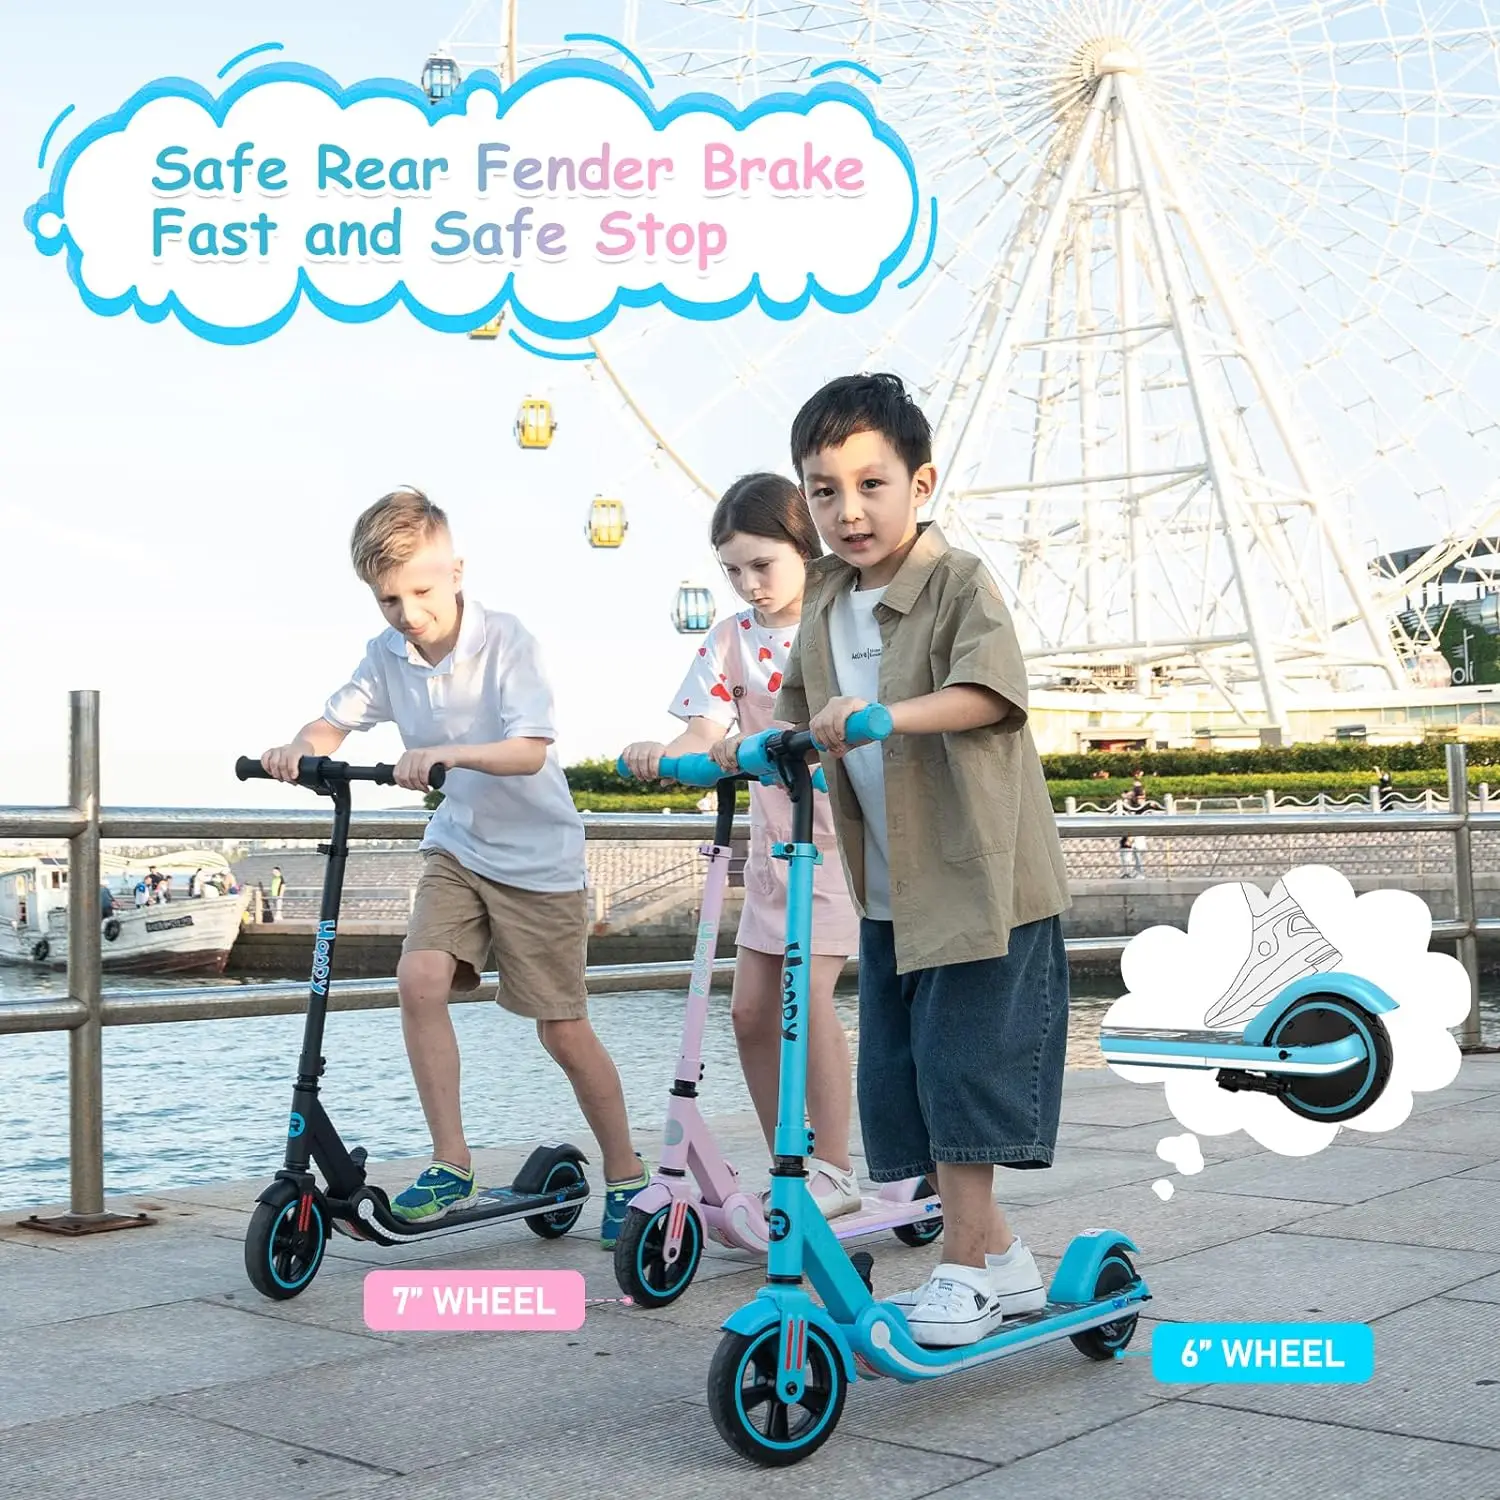 150W MotorElectric Scooter for Kids,- Bluetooth Speaker – Colorful LED Lights – Foldable – LED Display